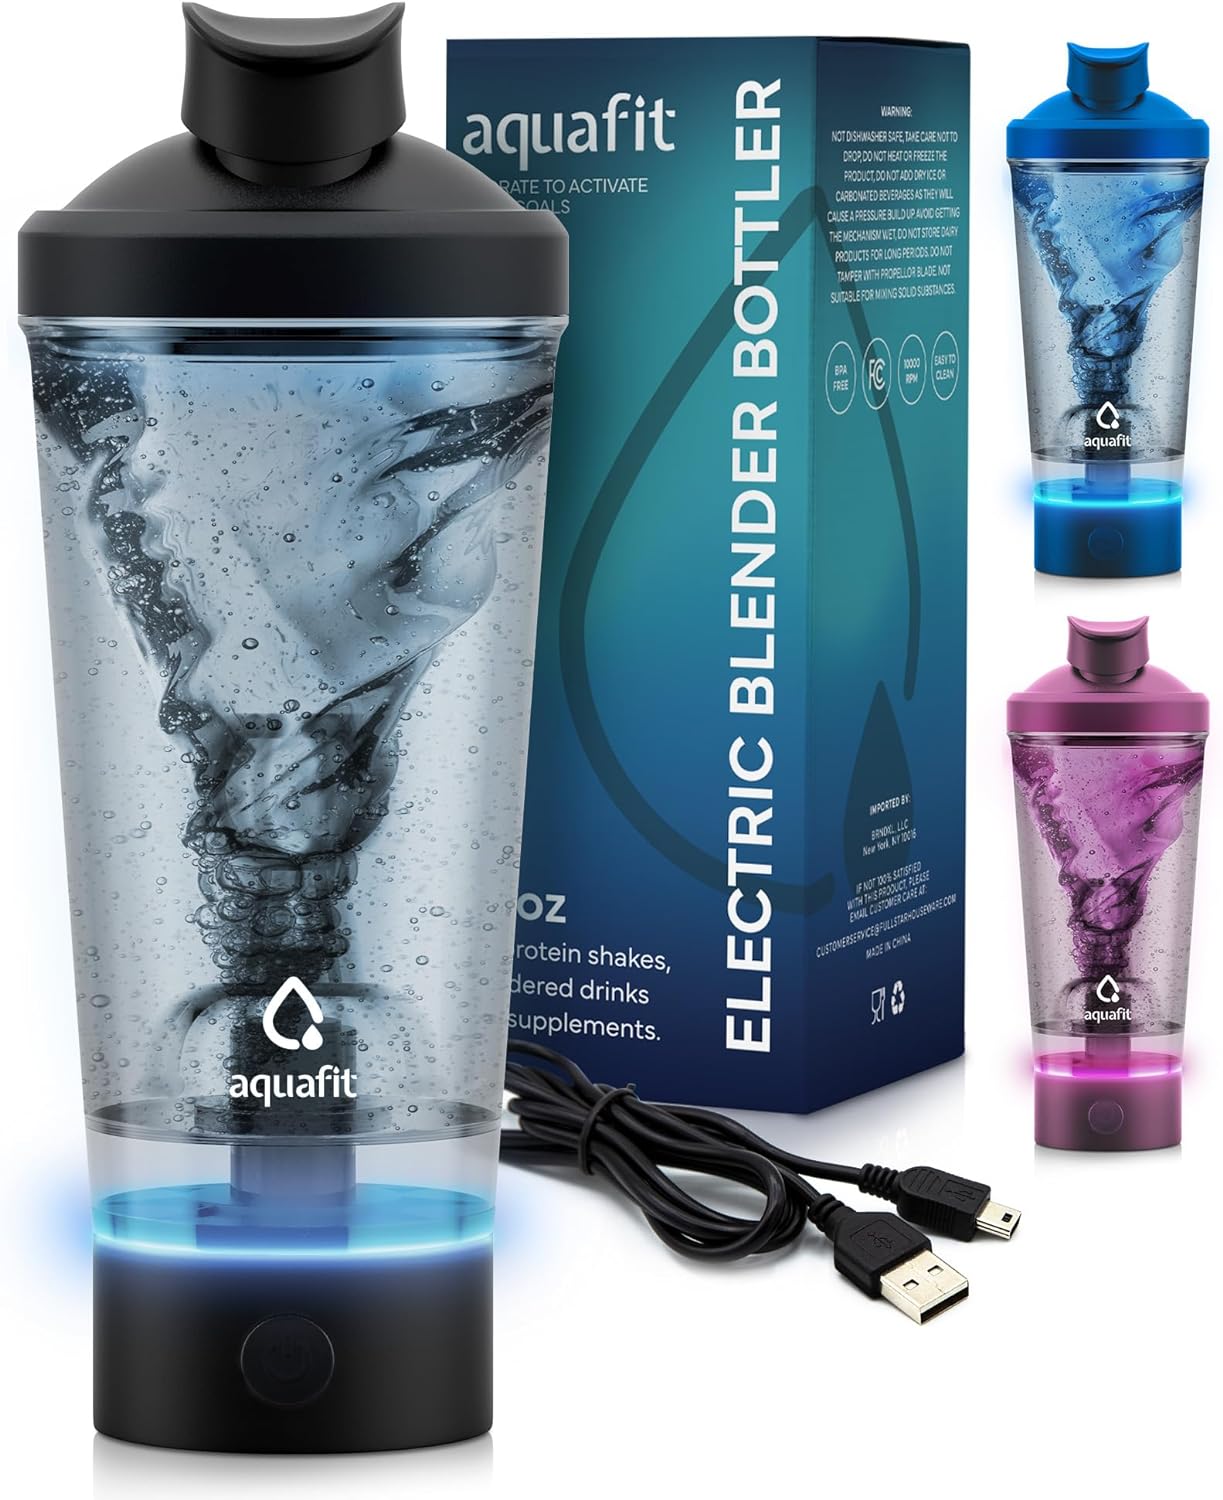 VOLTRX Electric Shaker Bottle Blue- USB Rechargeable Mixer , Shaker Cups for Protein Shakes, BPA-Free, Waterproof, Colored Light Base, 24 oz